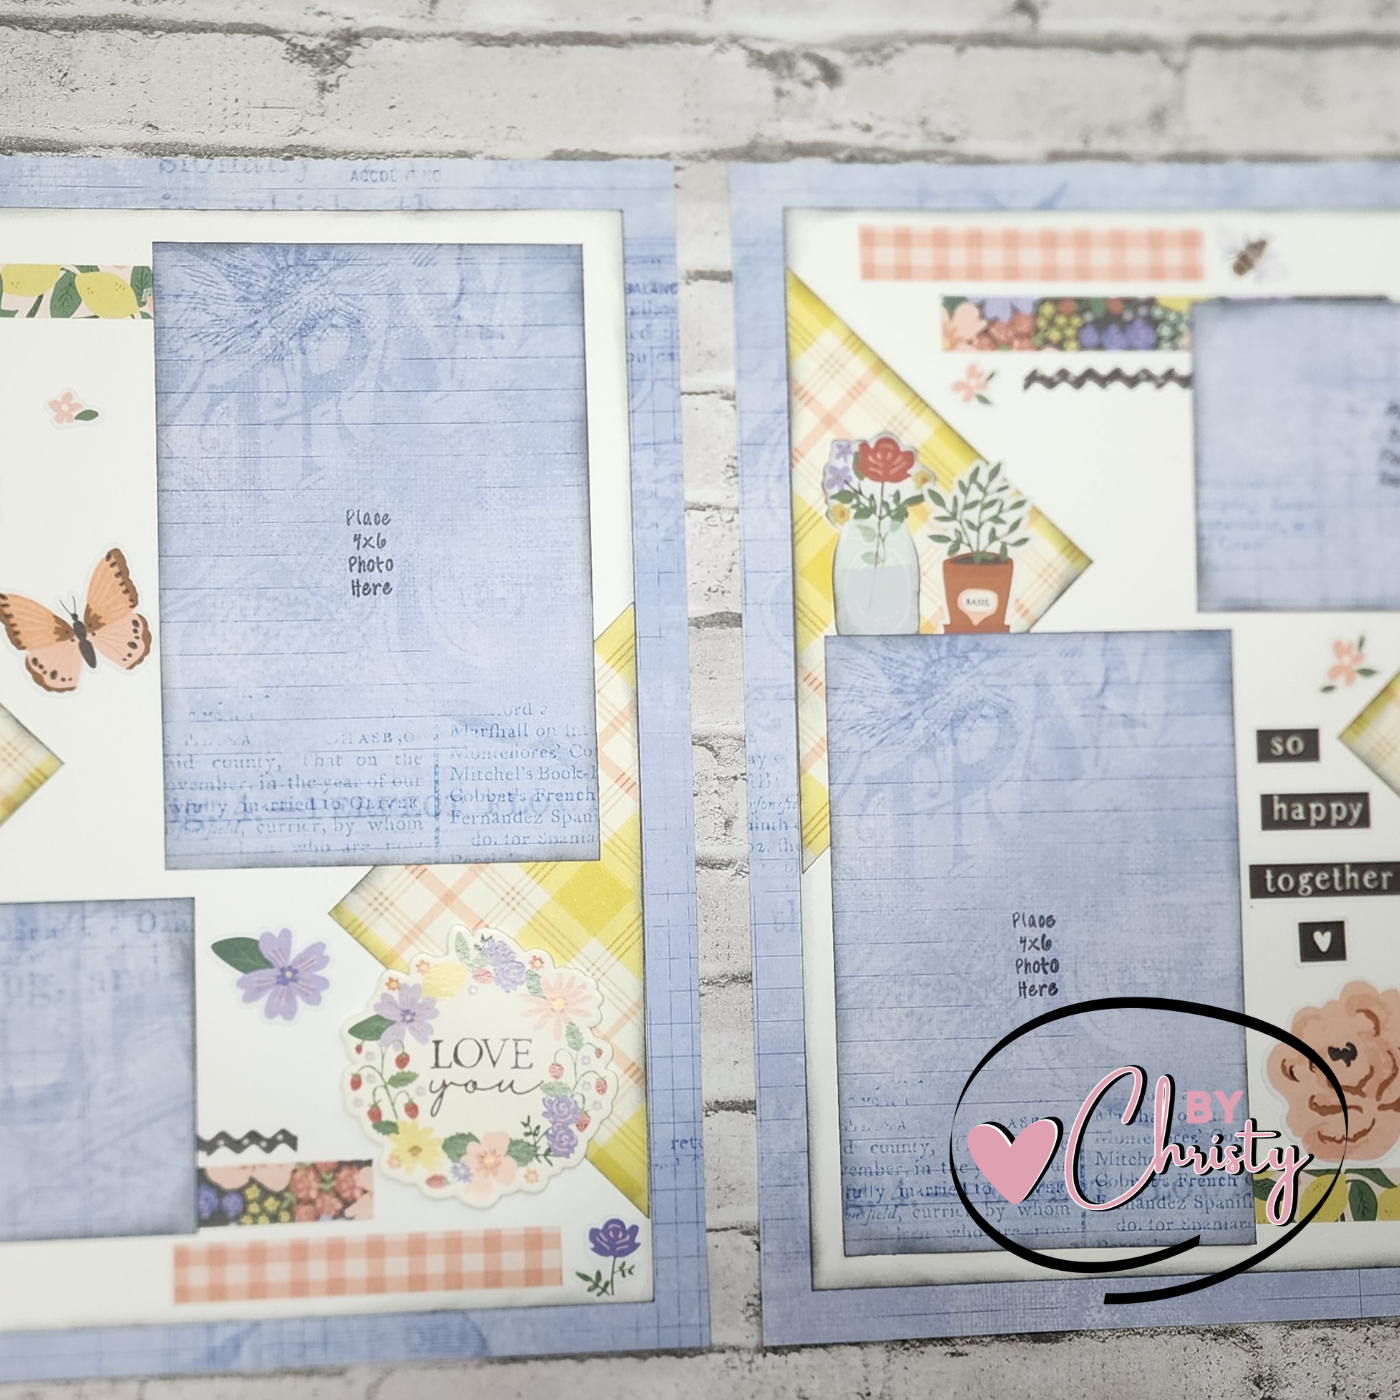 Custom . So Happy Together 2 Page 12x12 Scrapbook Layout